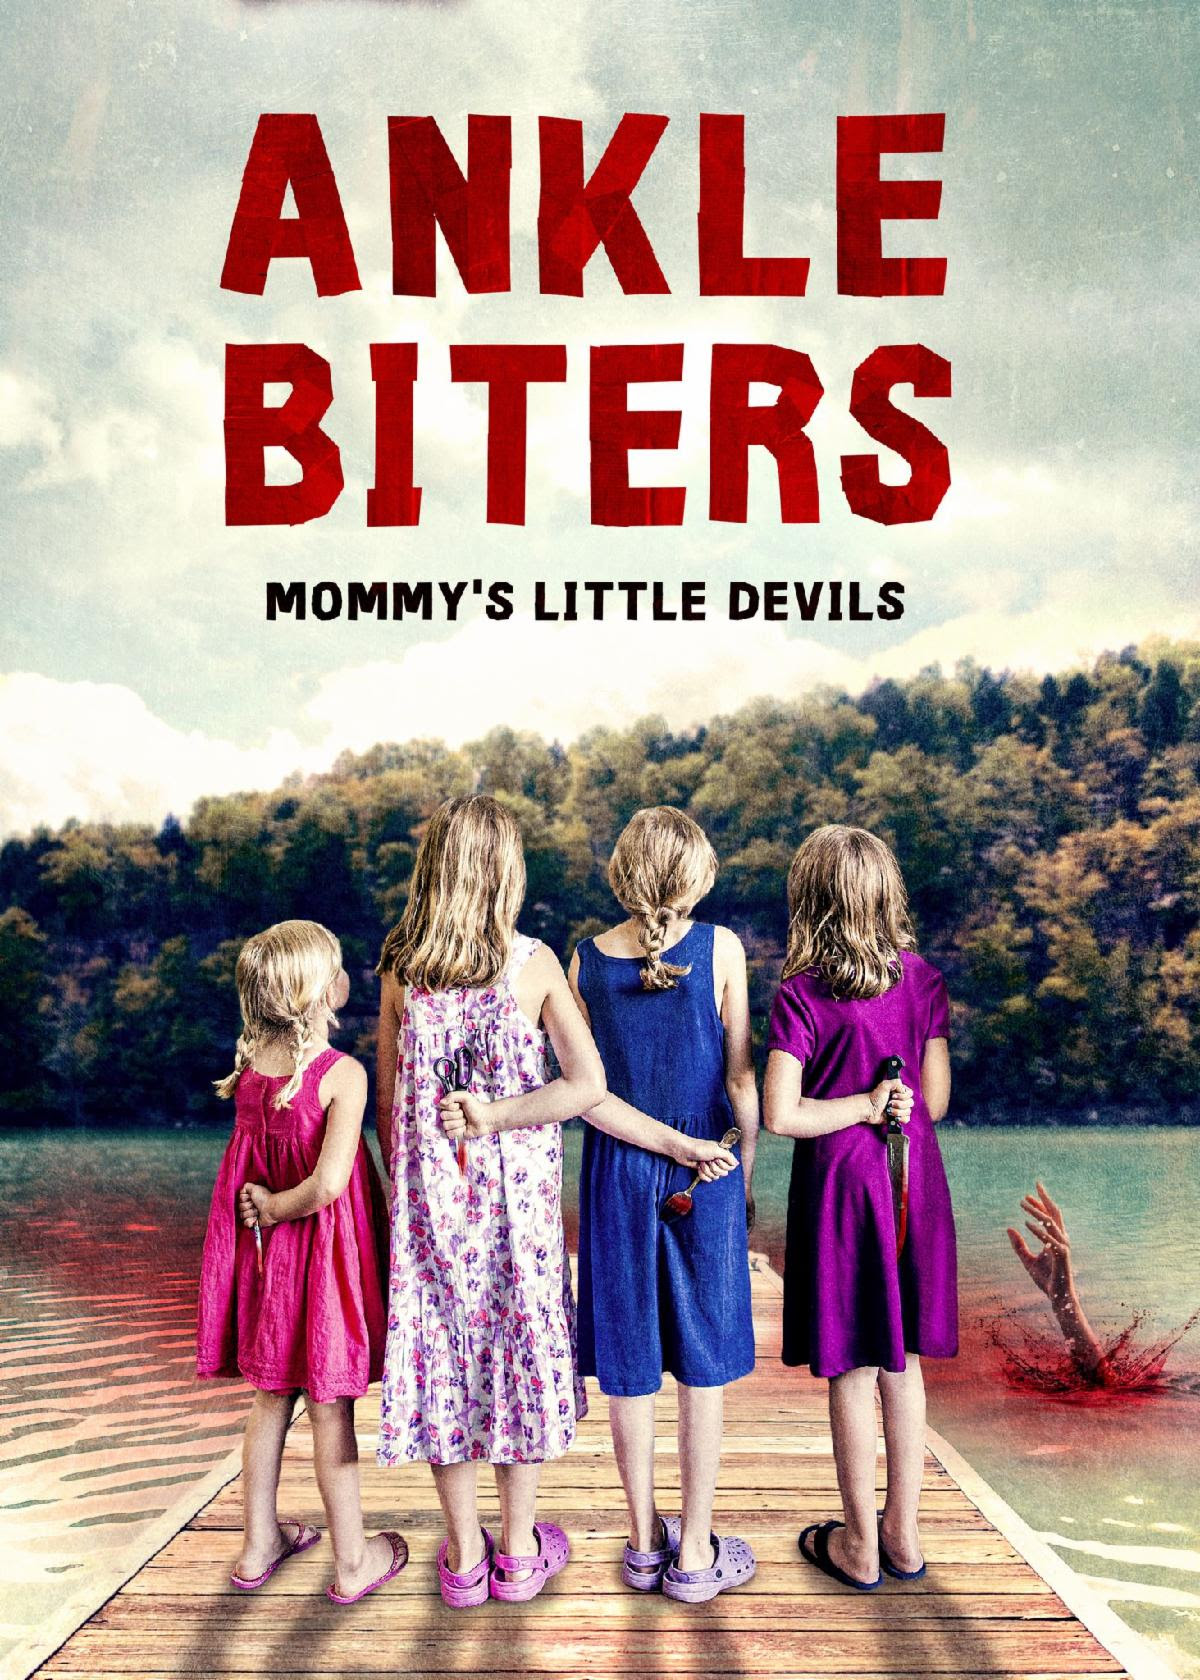 Ankle Biters movie review